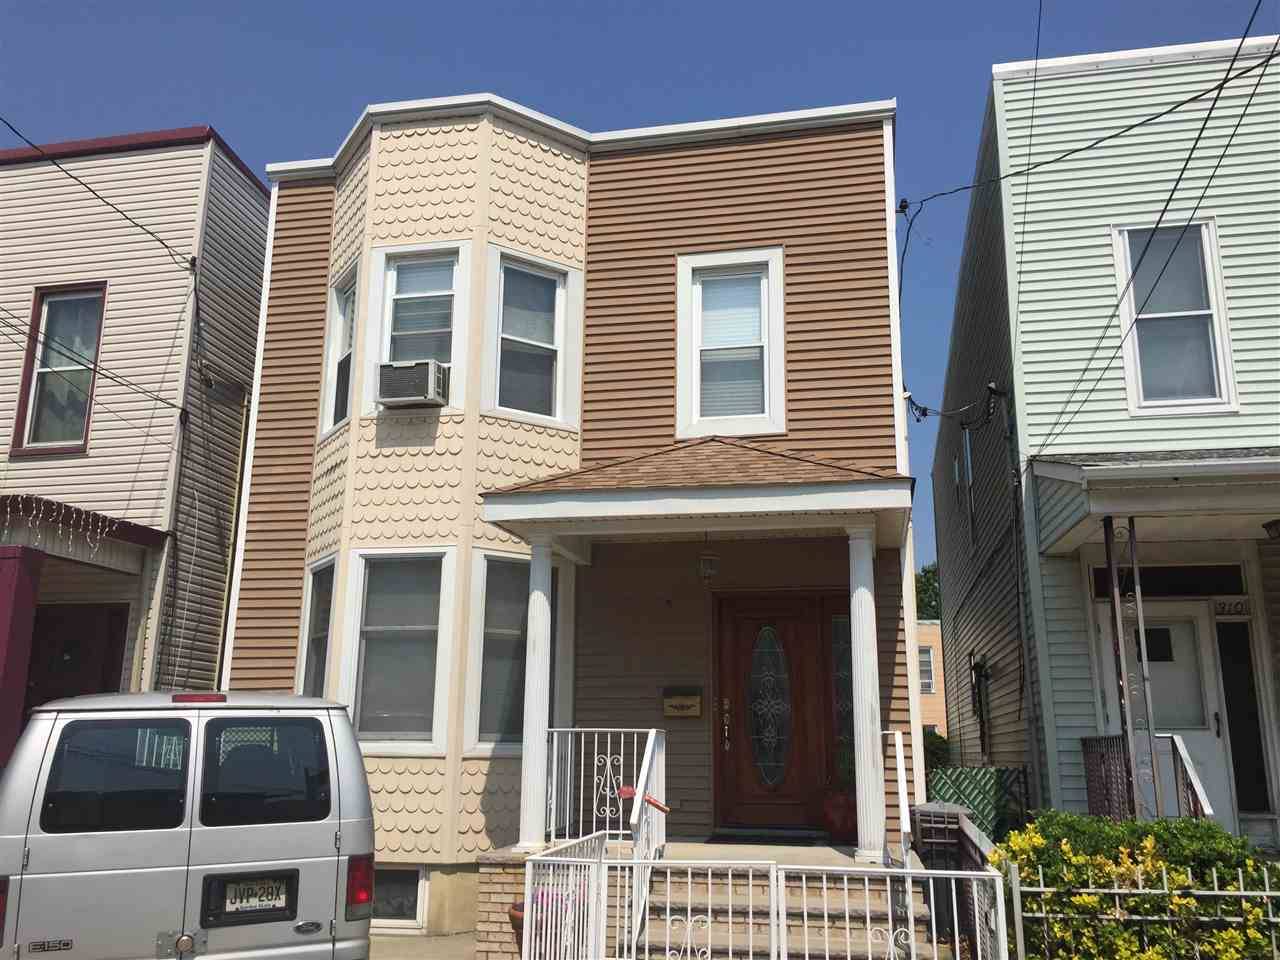 THE PROPERTY IS SOLD AS IS - Multi-Family New Jersey